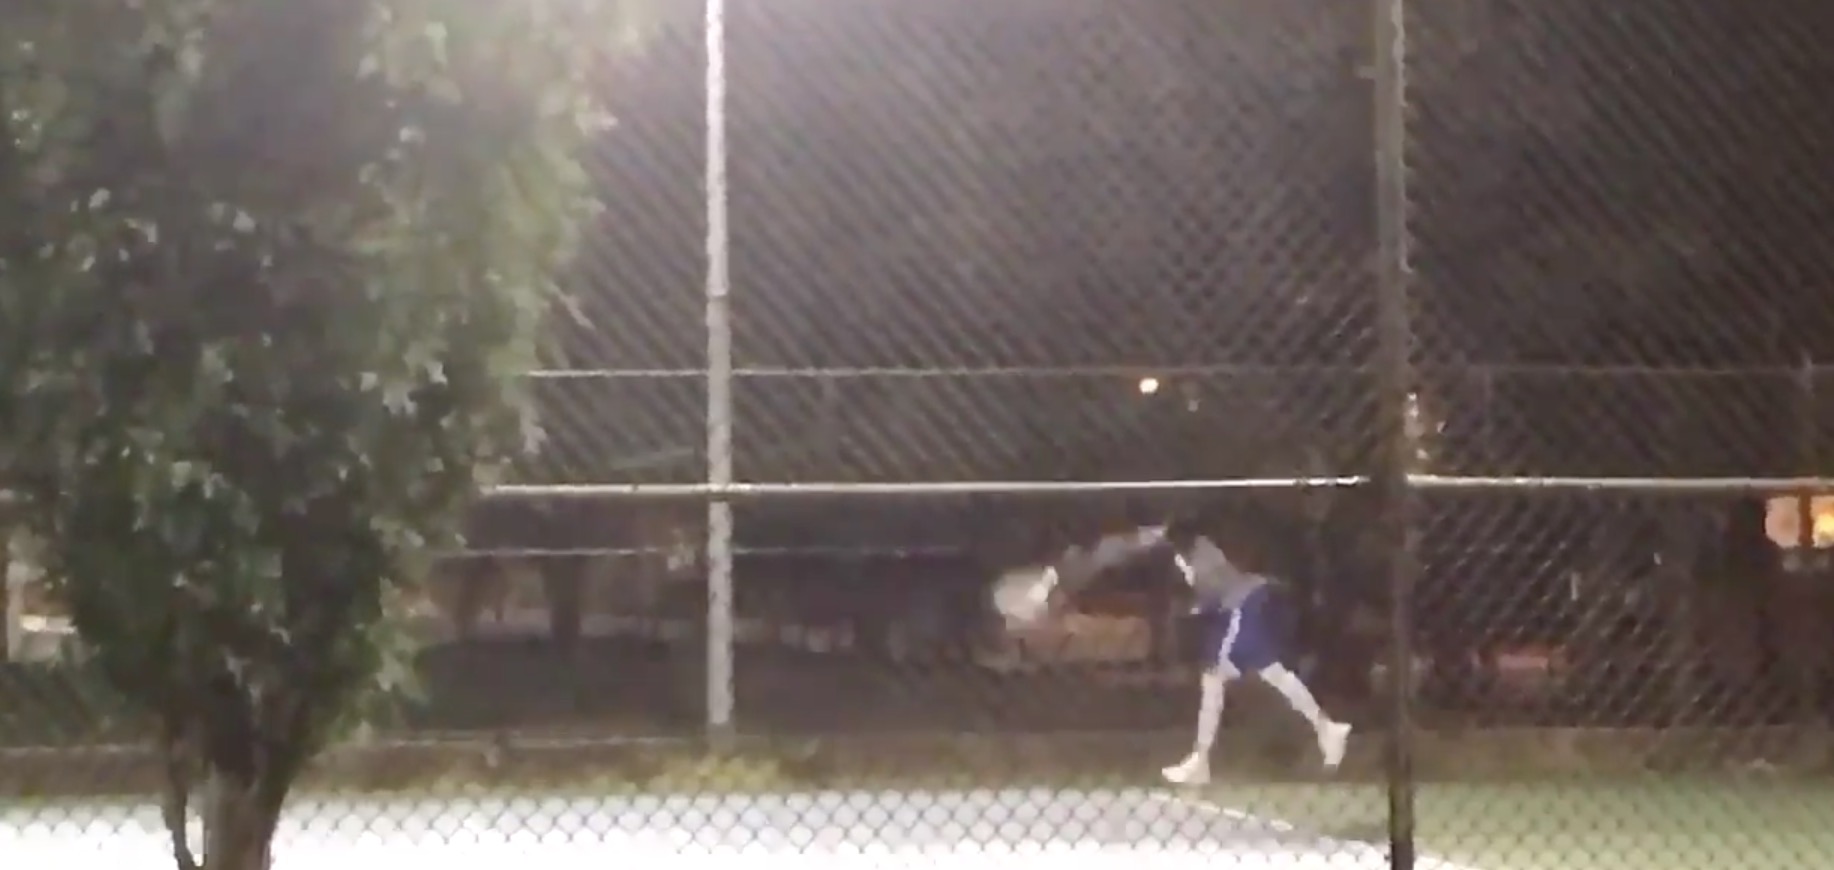 And Now We Have Video of Joel Embiid Dominating Tennis Courts at Night